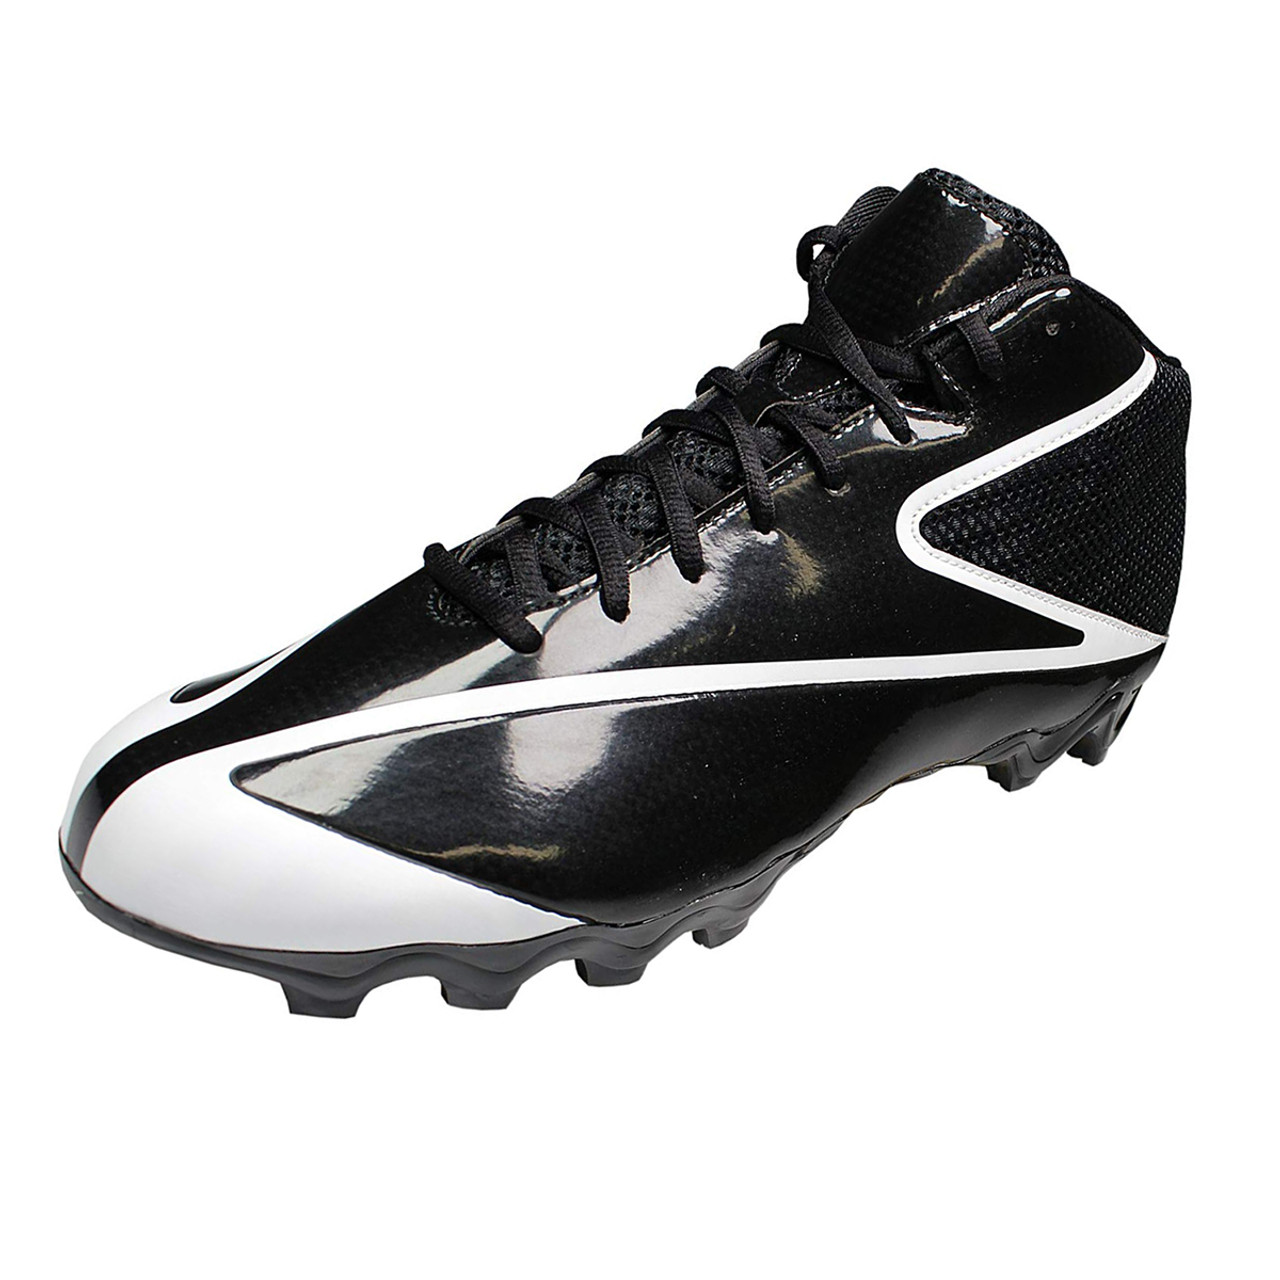 Selling - reebok youth football cleats 